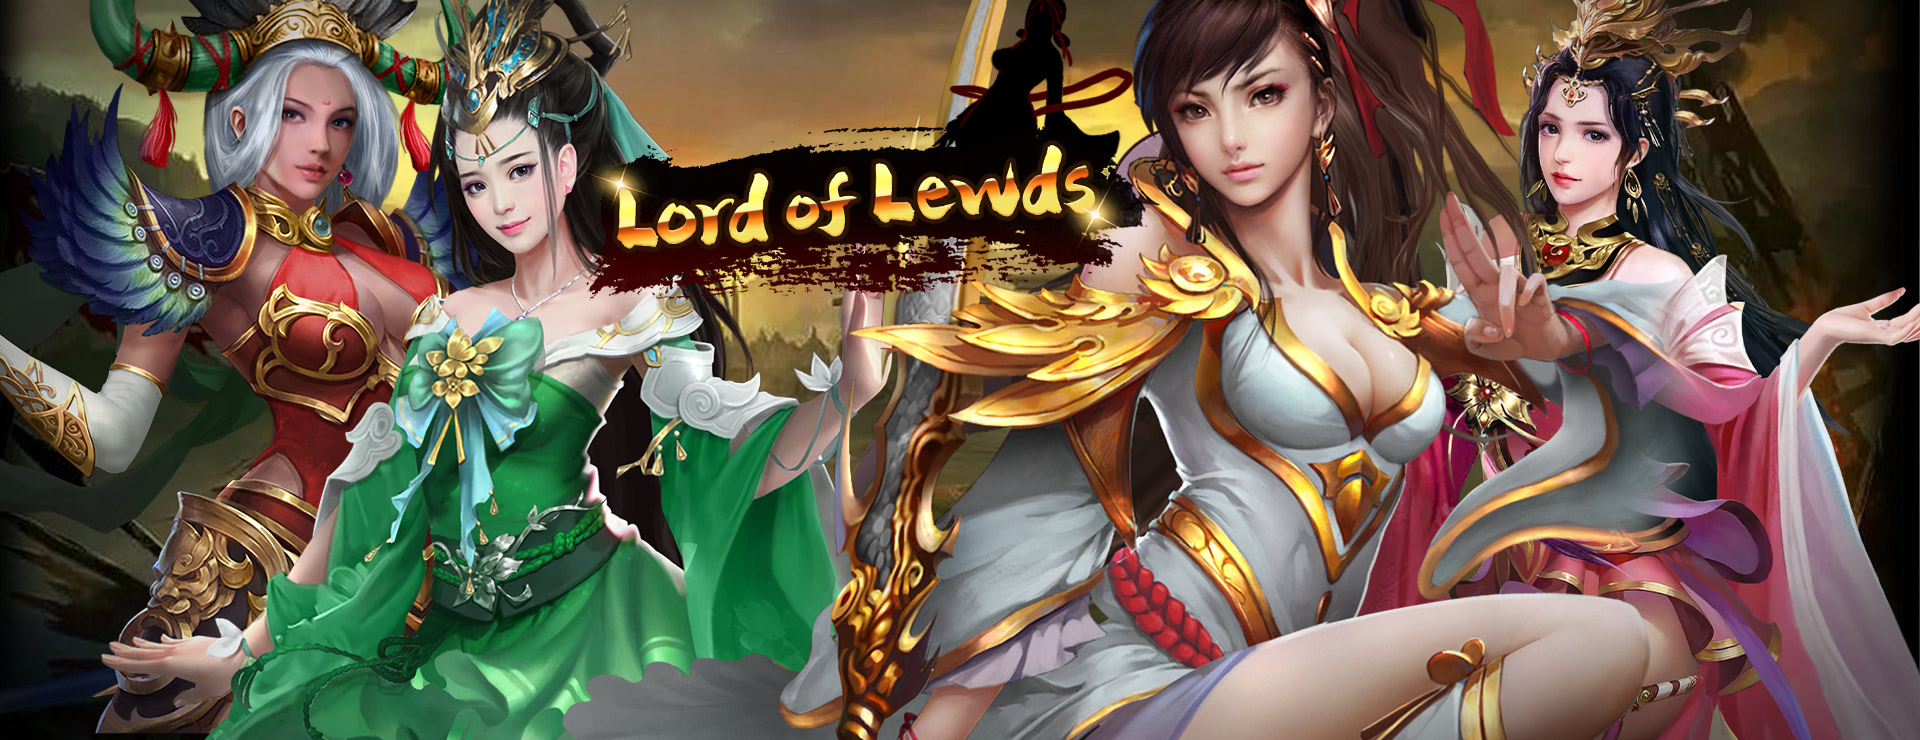 Lord of Lewds Game - Strategia Gra